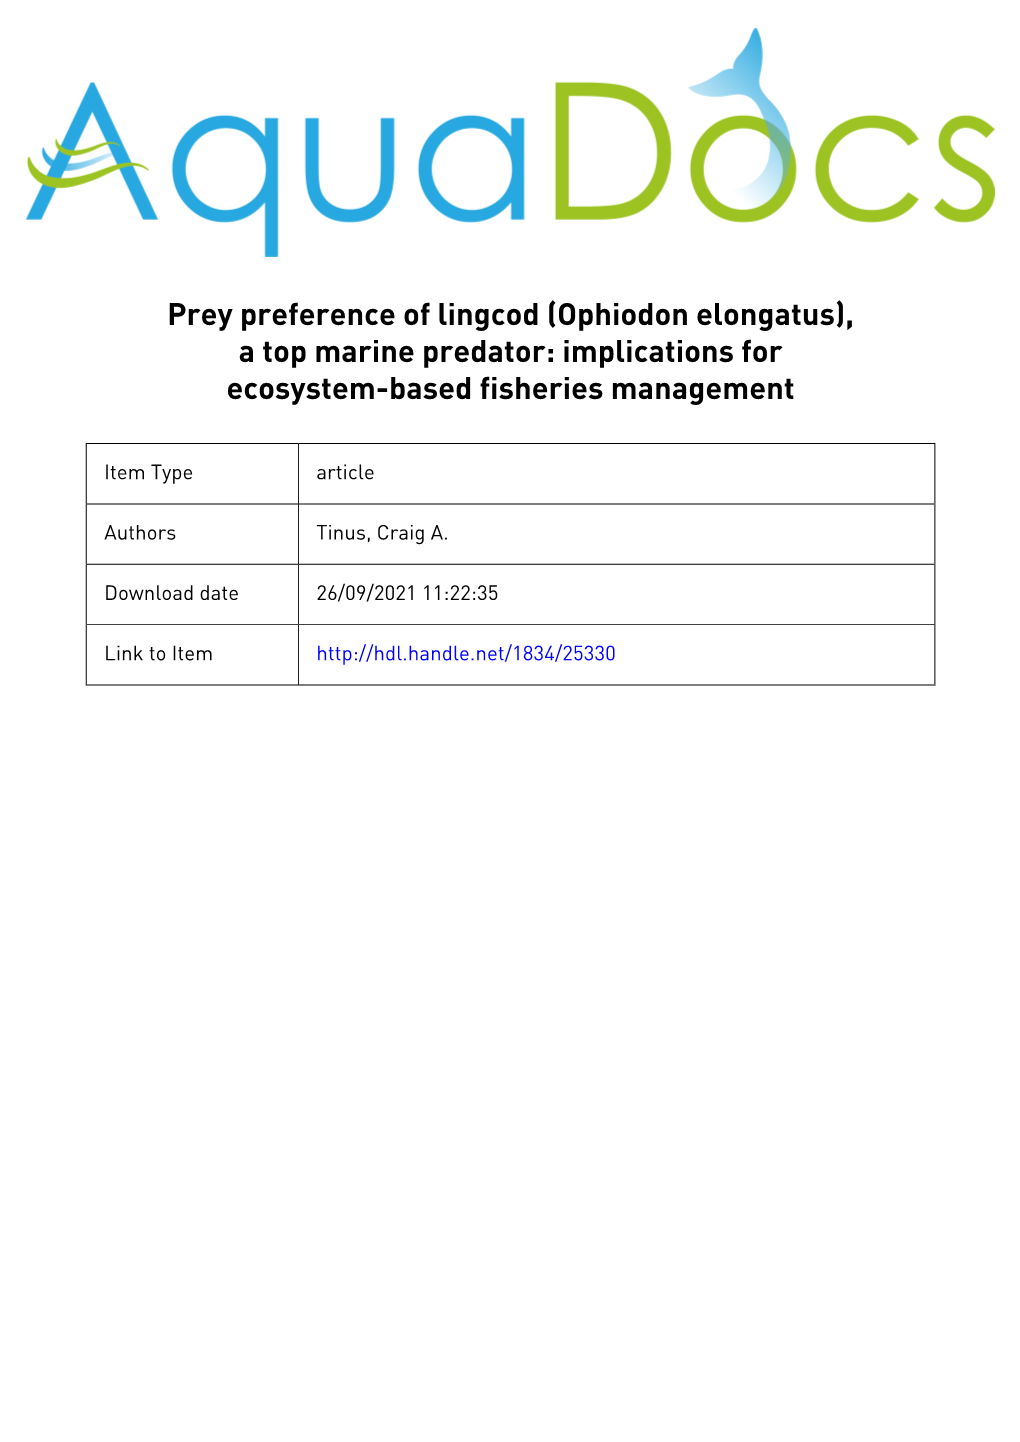 Prey Preference of Lingcod (Ophiodon Elongatus), a Top Marine Predator: Implications for Ecosystem-Based Fisheries Management